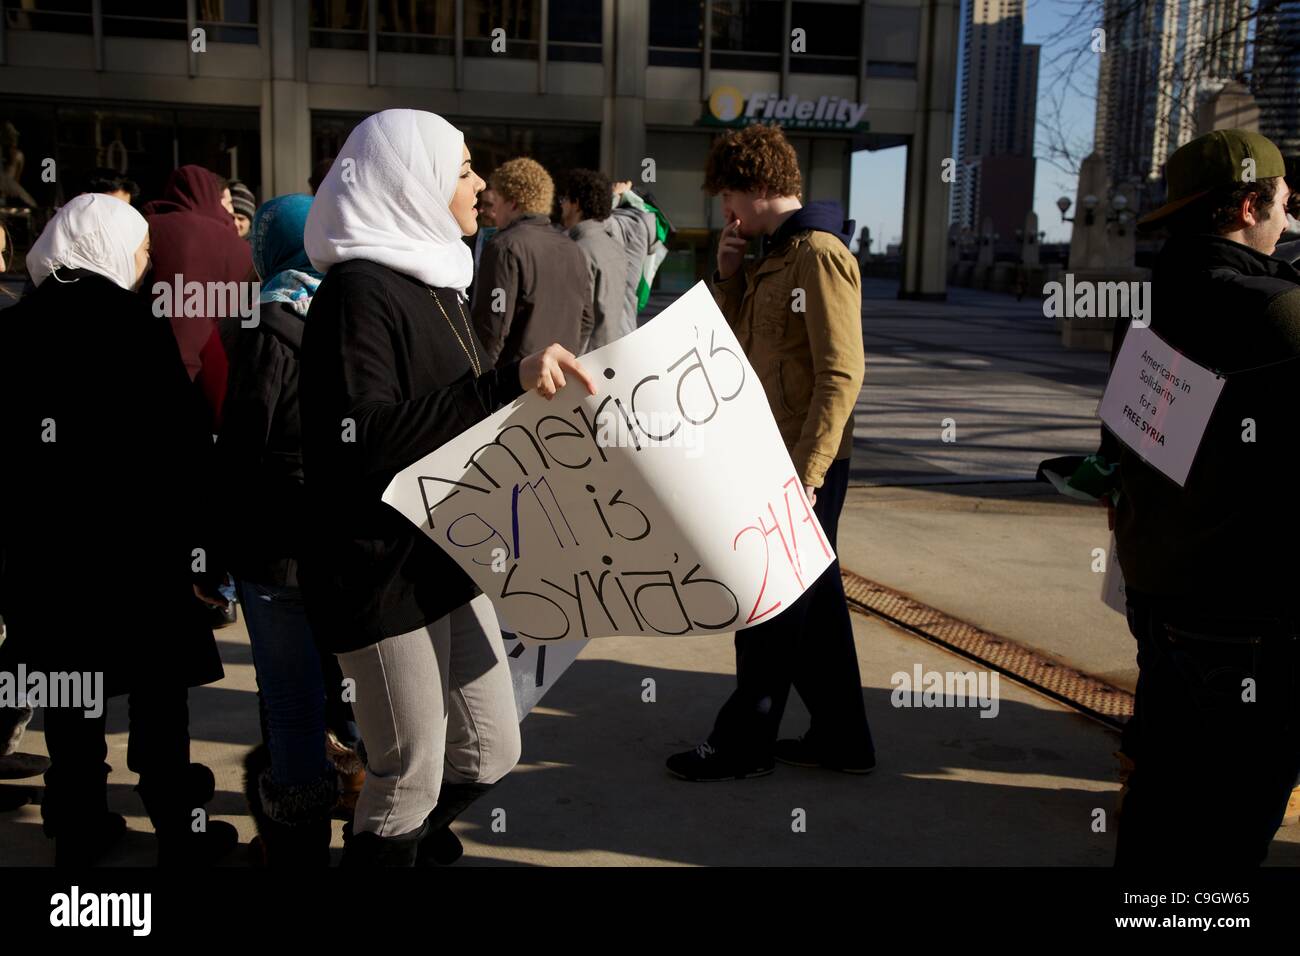 Chicago, USA, 29/12/2011. Protesters in Pioneer Court during anti-Syrian government protest. . The demonstrators gathered to protest the Syrian government's treatment of its citizens. Stock Photo